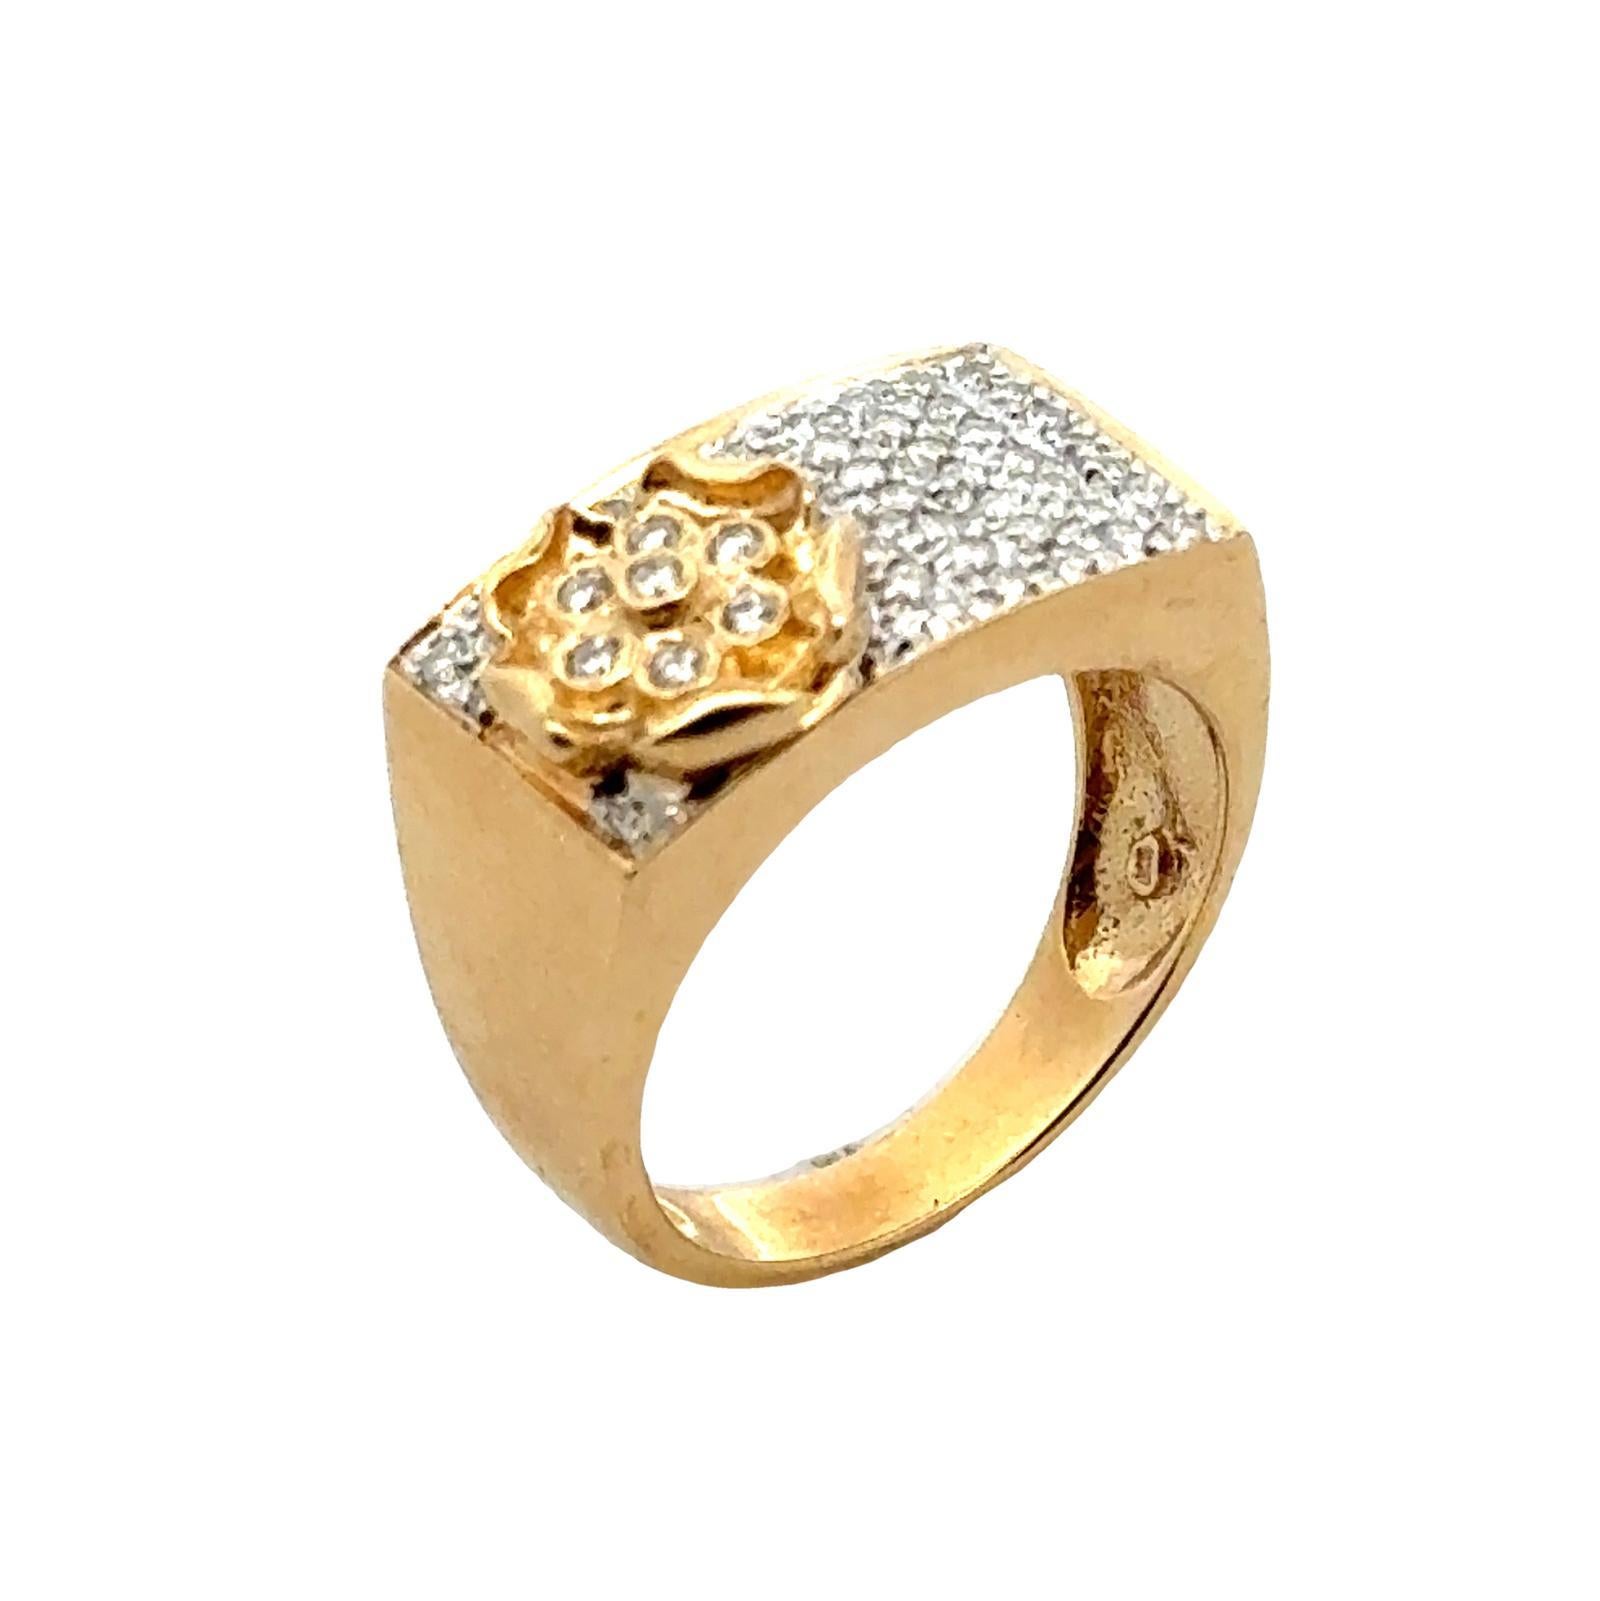 Modern Pave Diamond 14 Karat Yellow Gold Square Top Floral Design Band Ring In Excellent Condition For Sale In Boca Raton, FL